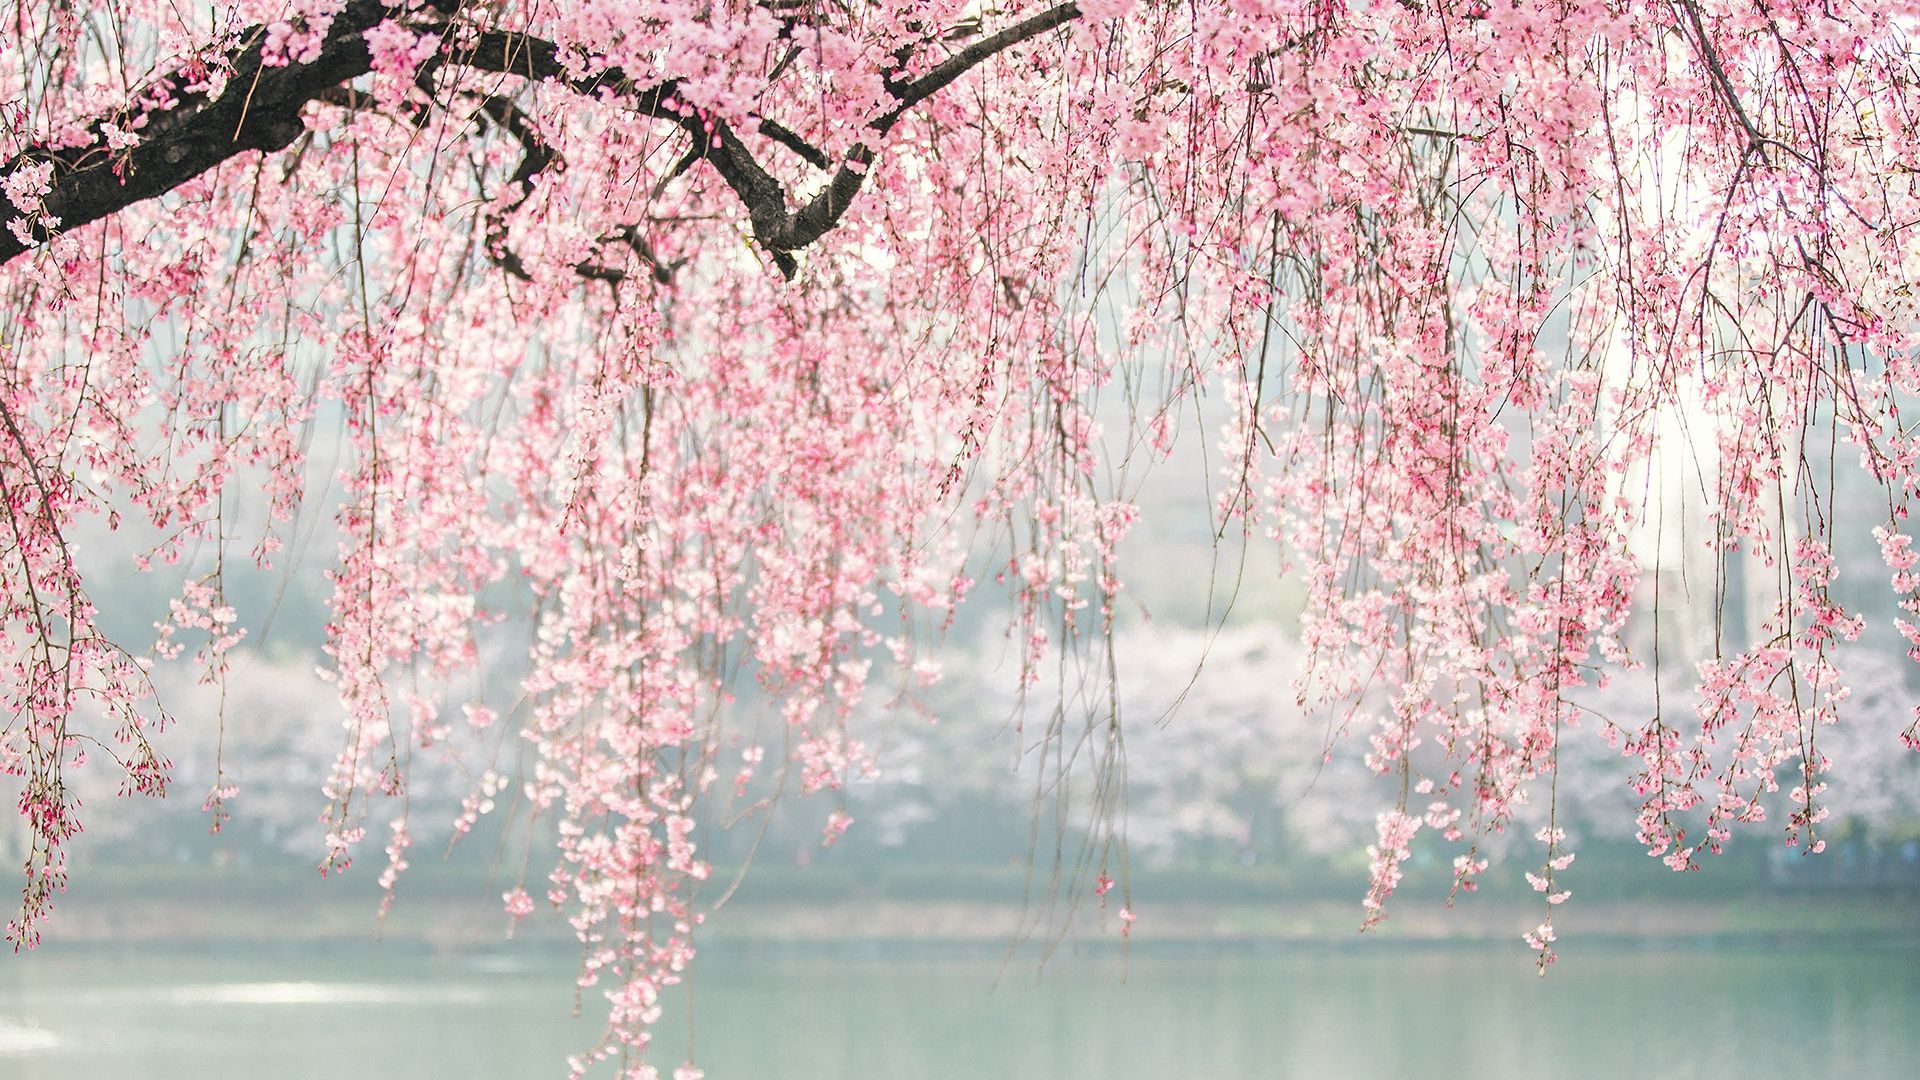 Desktop Wallpapers Japan, Cherry Blossom, Tree, Flowers, Hd Image, Picture, Background, D59fb0